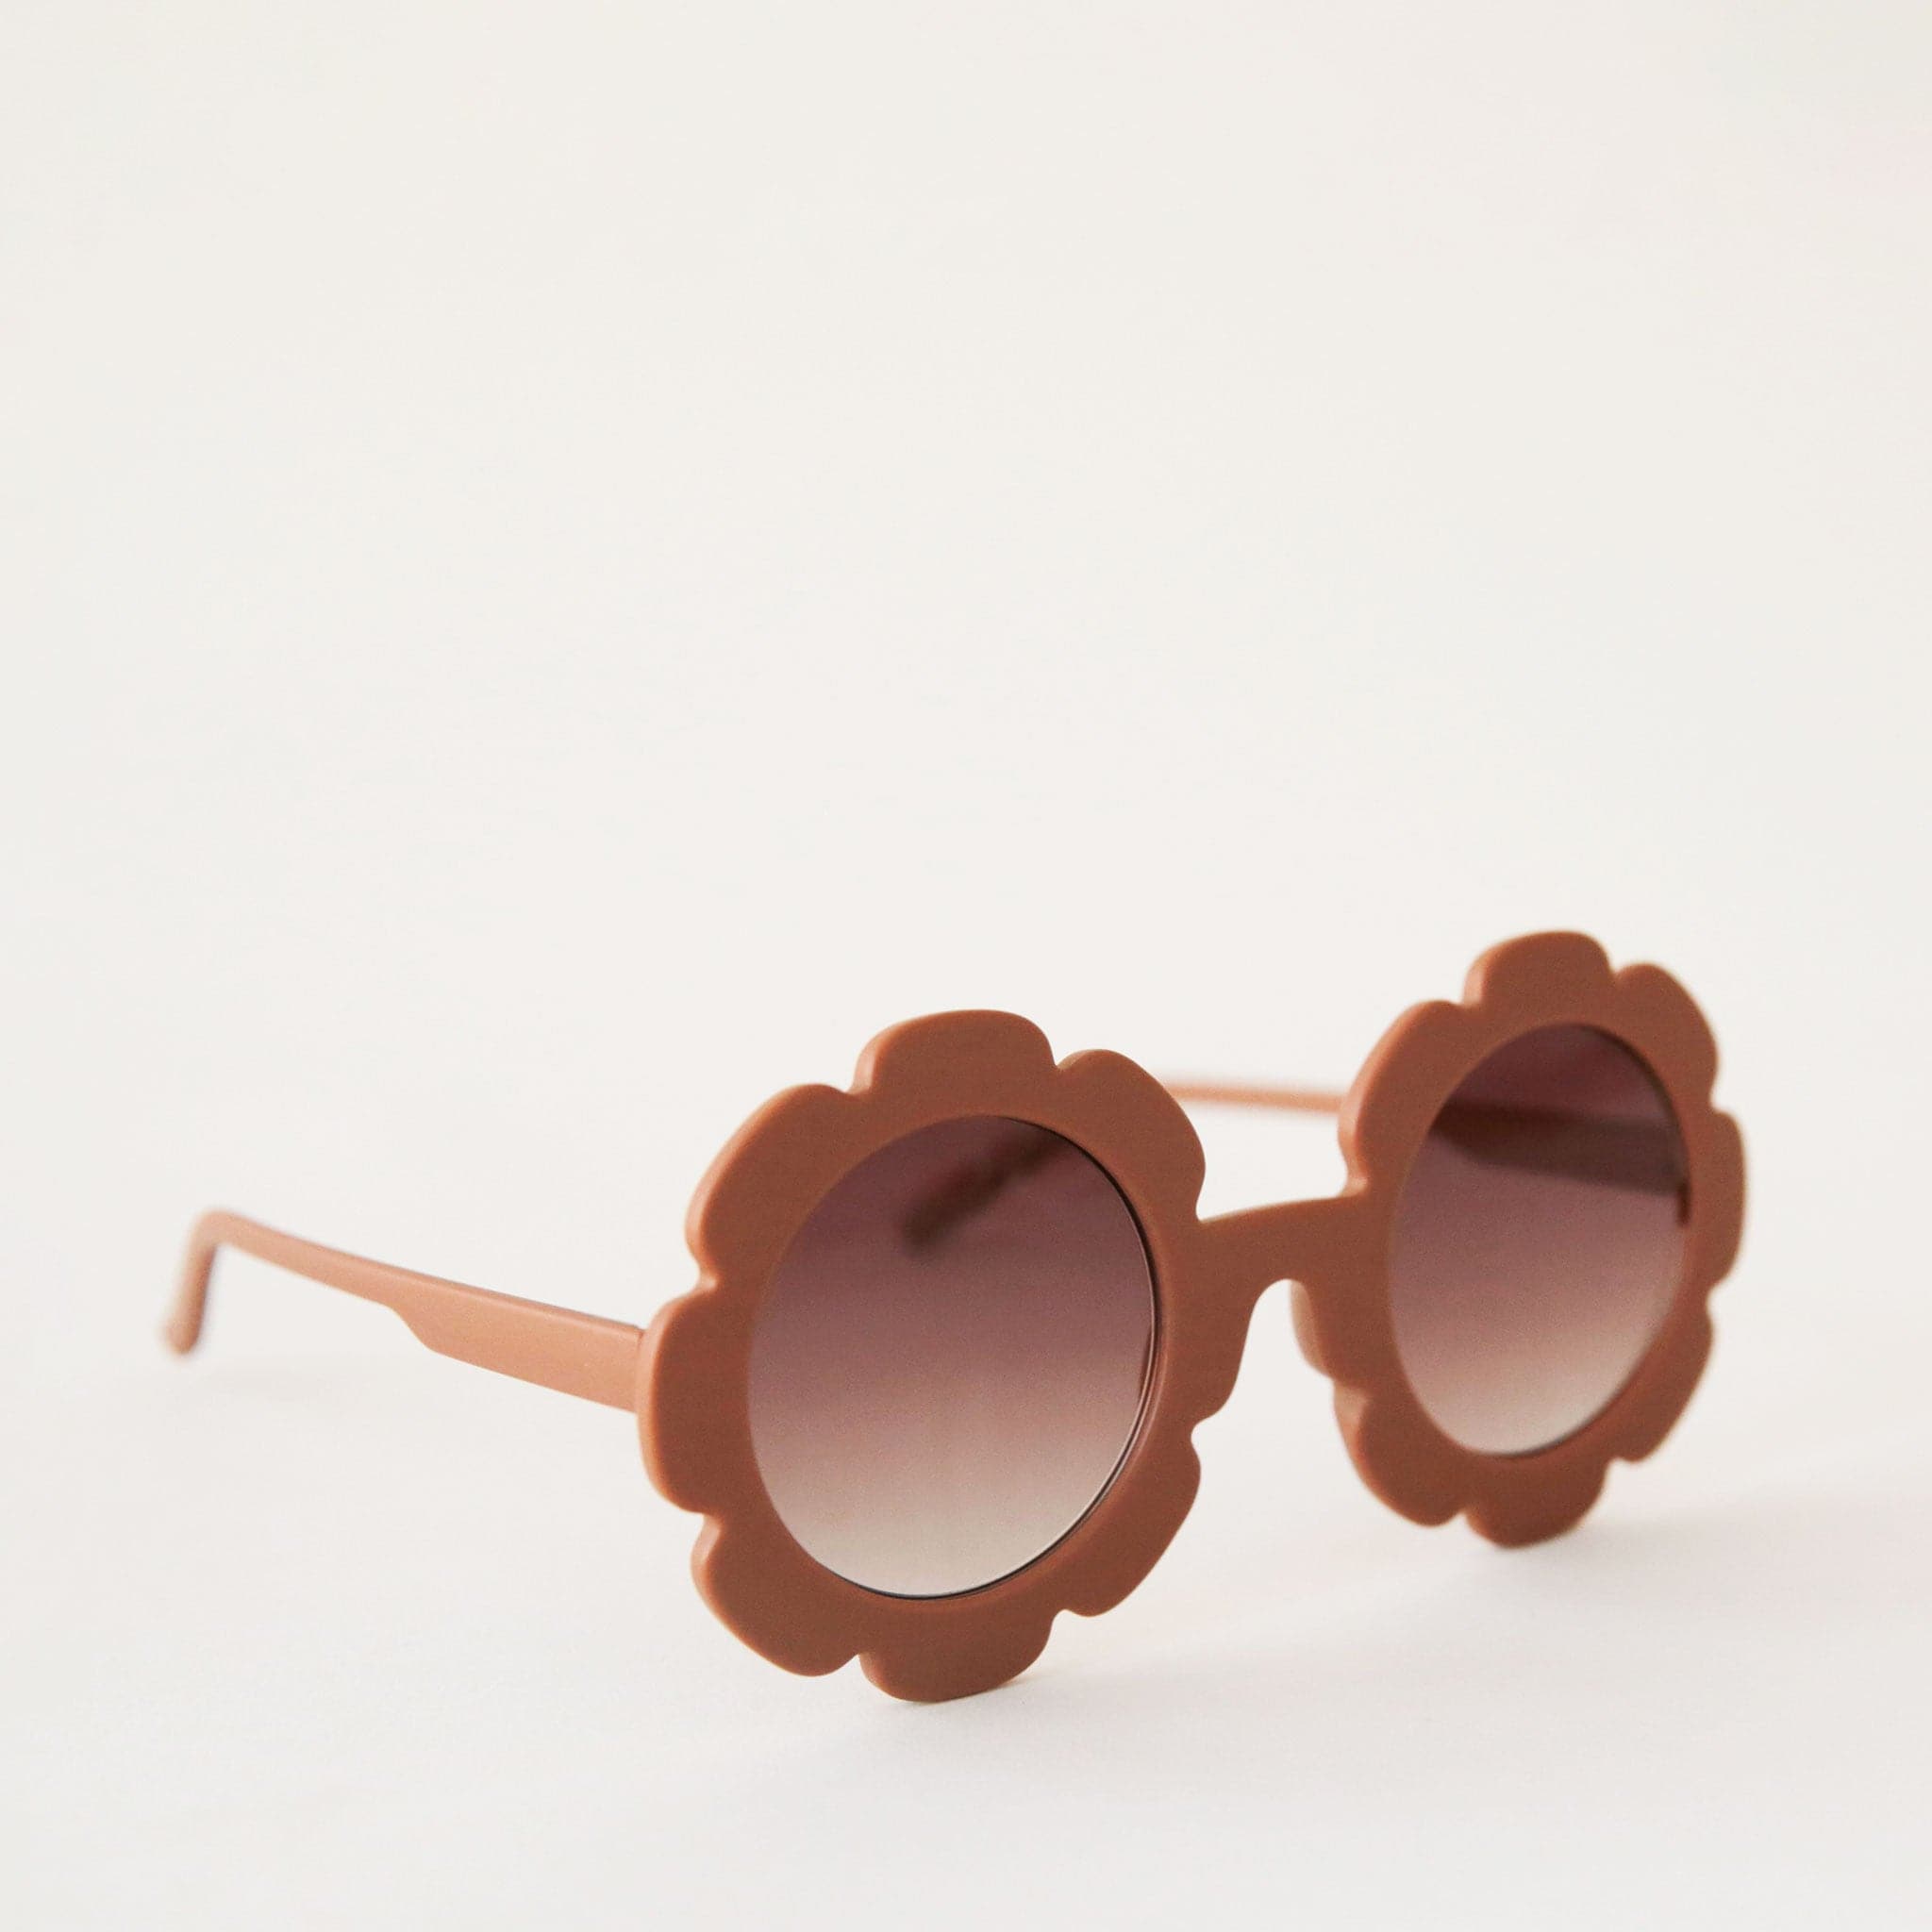 Brown flower shaped sunglasses with light brown circle lenses in the center. 